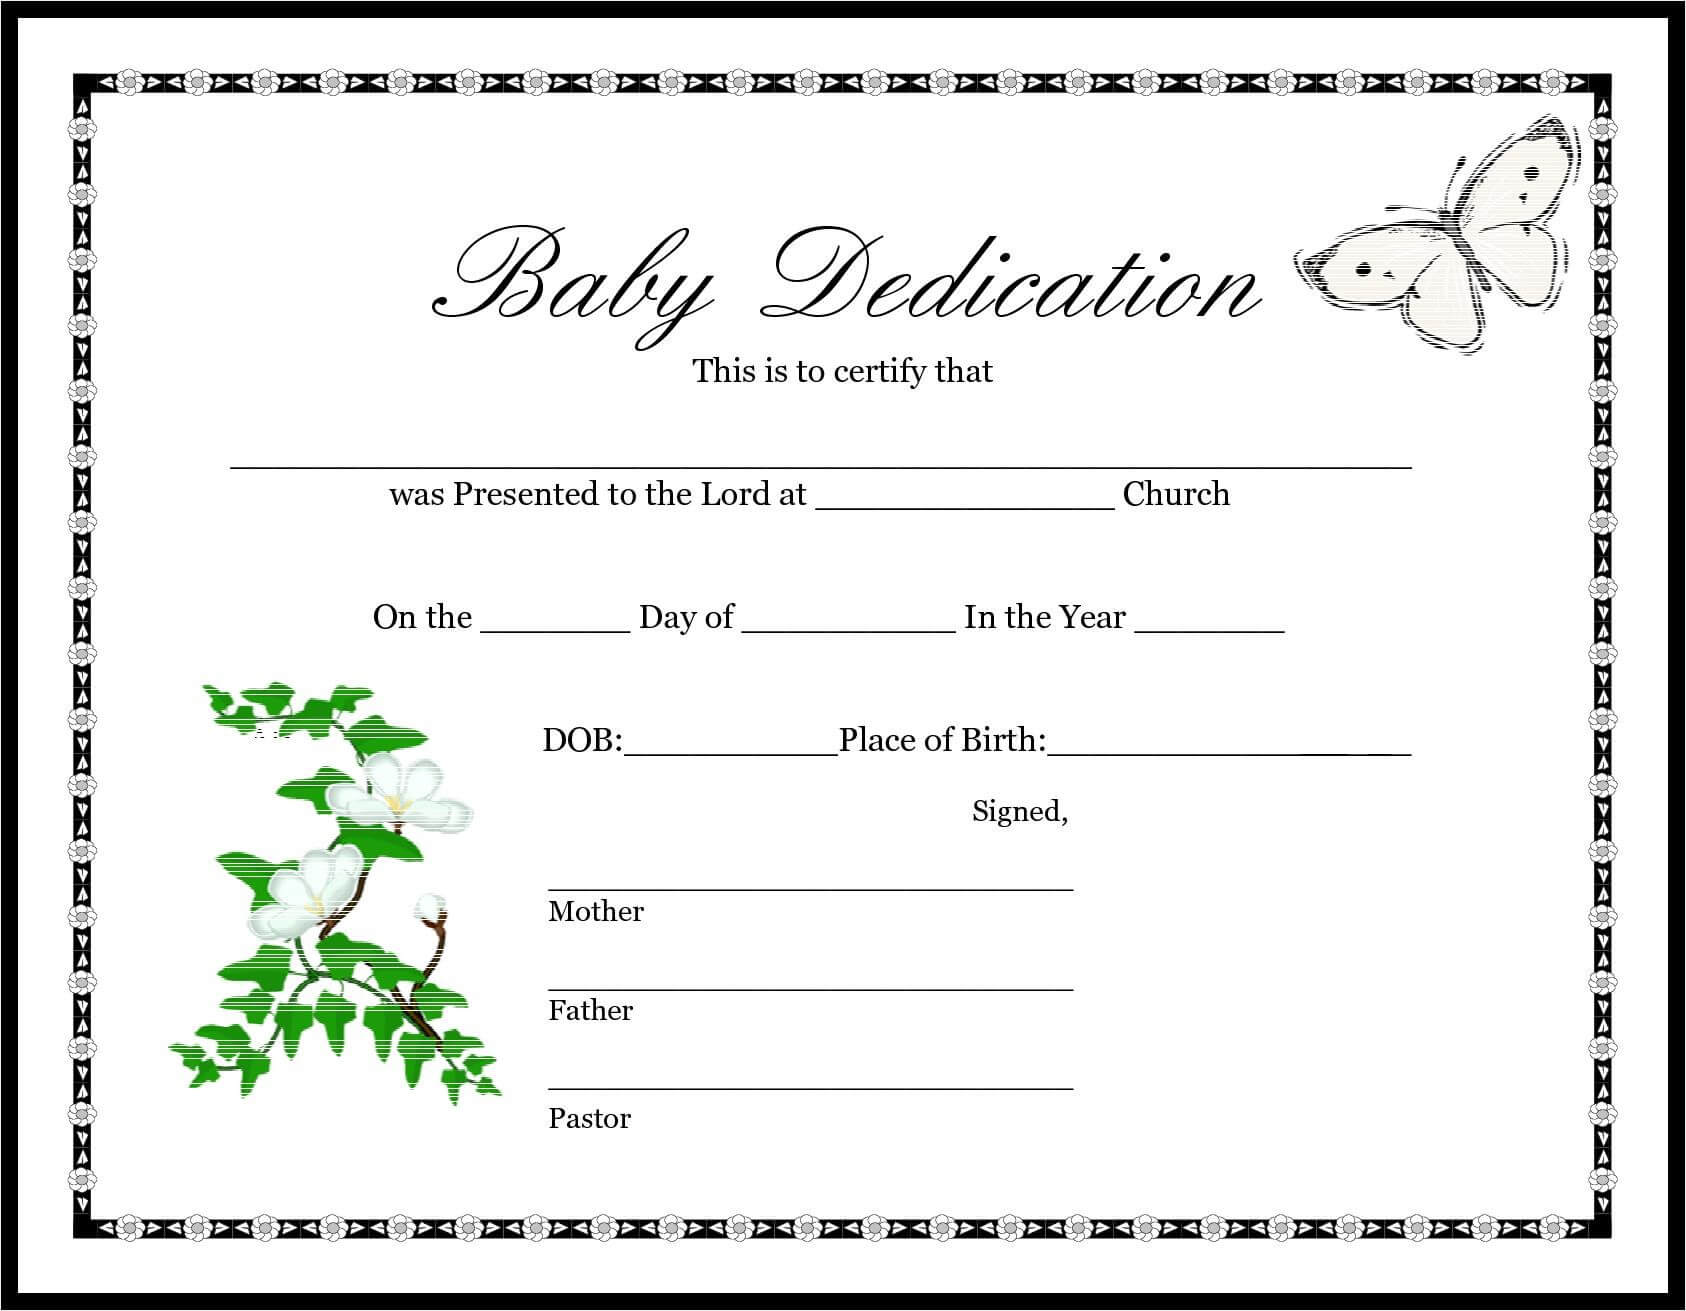 Certificates. Wonderful Official Birth Certificate Template Throughout Baby Dedication Certificate Template